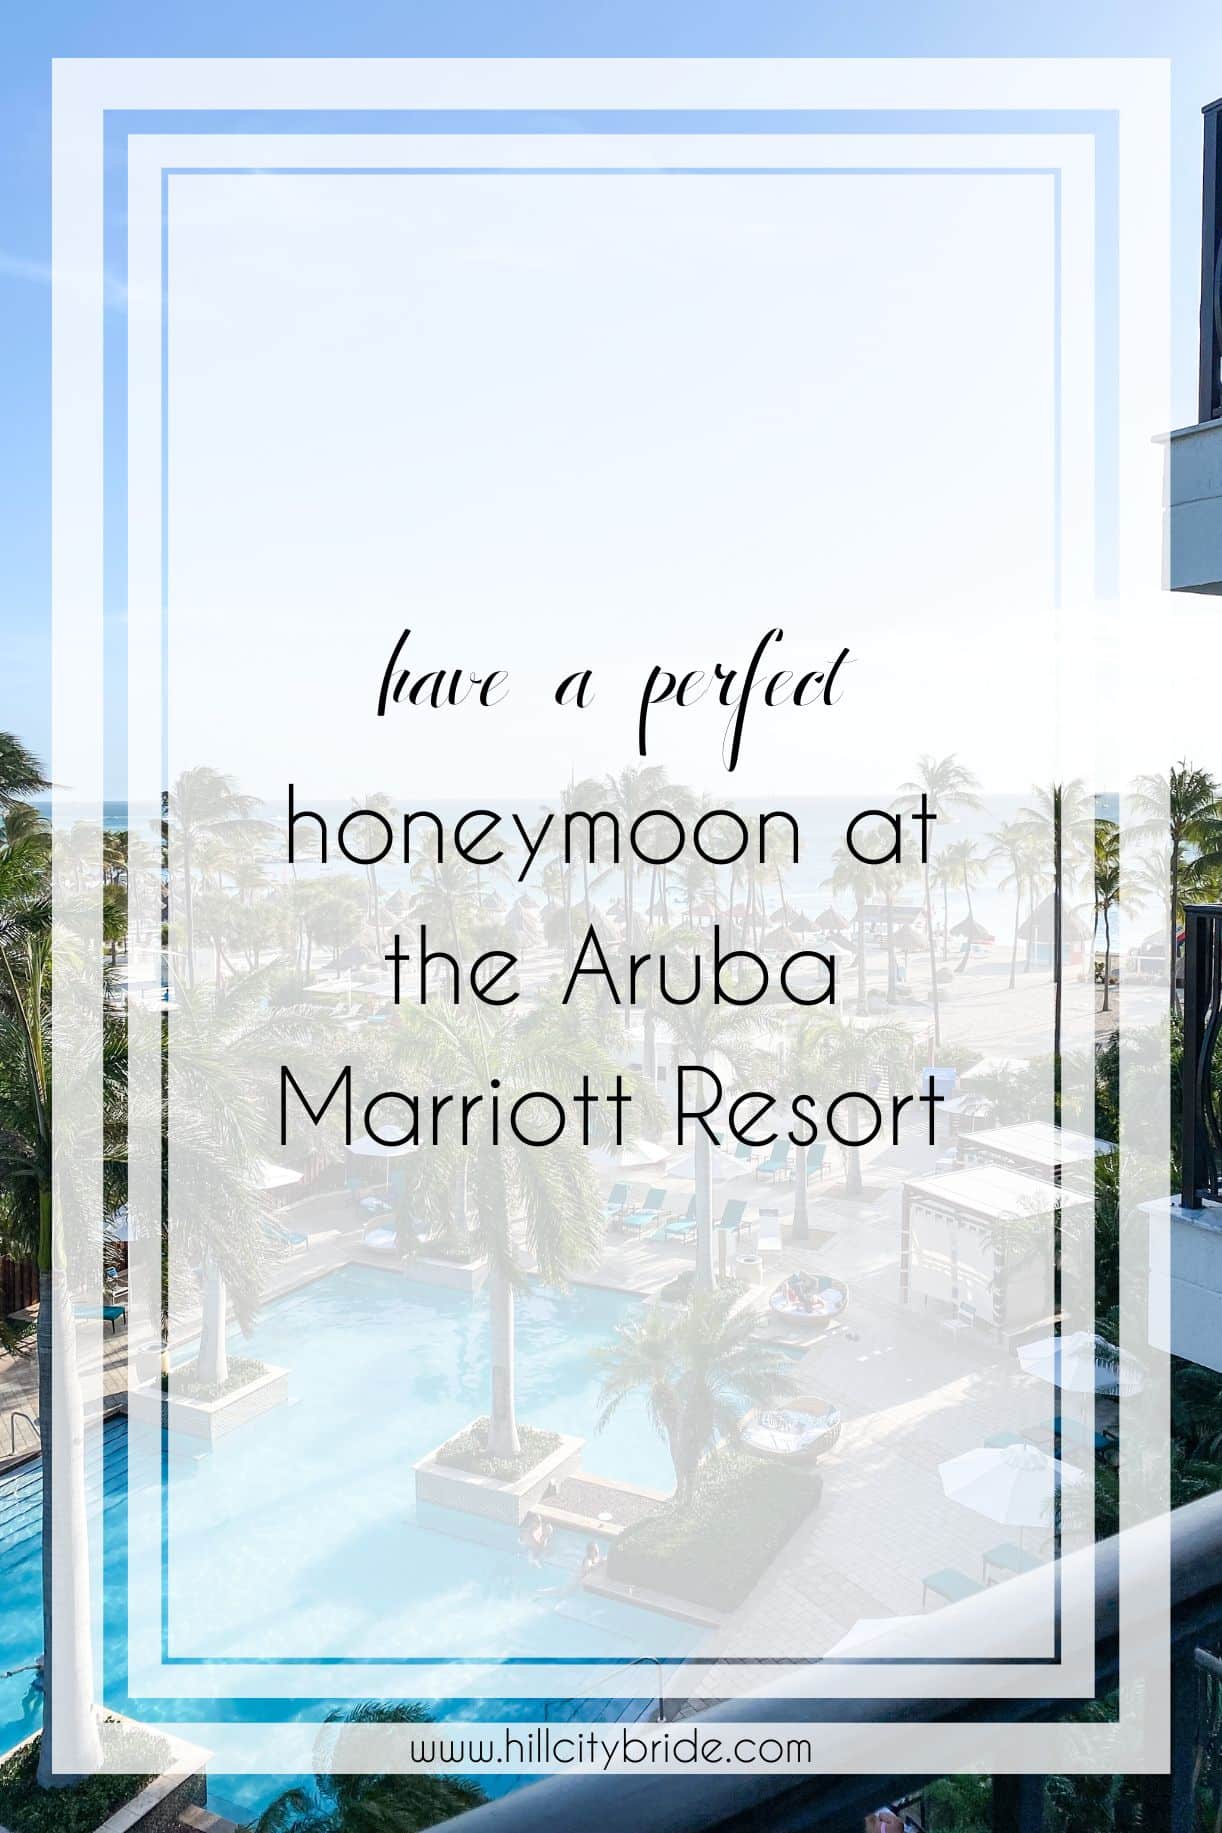 How to Spend a Perfect Honeymoon at the Aruba Marriott Resort